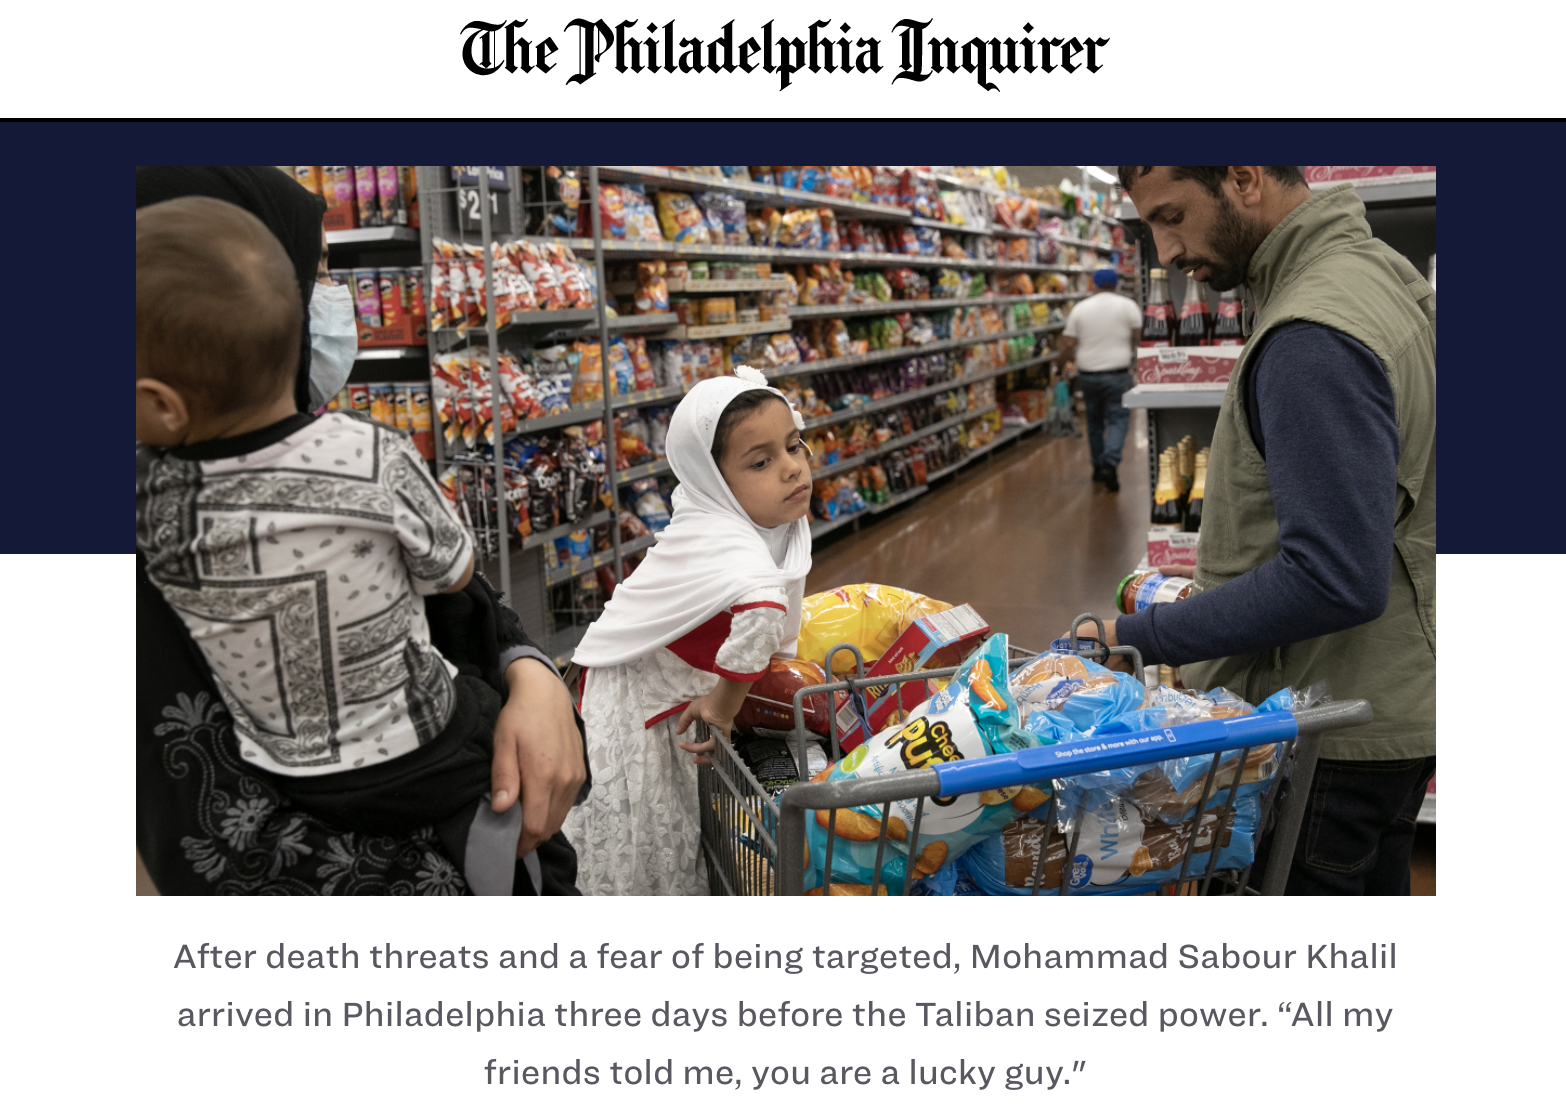 a screen shot from the Philadelphia Inquirer showing a family in a grocery store with the caption "After death threats and a fear of being targeted, Mohammad Sabour Khalil arrived in Philadelphia three days before the Taliban seized power."